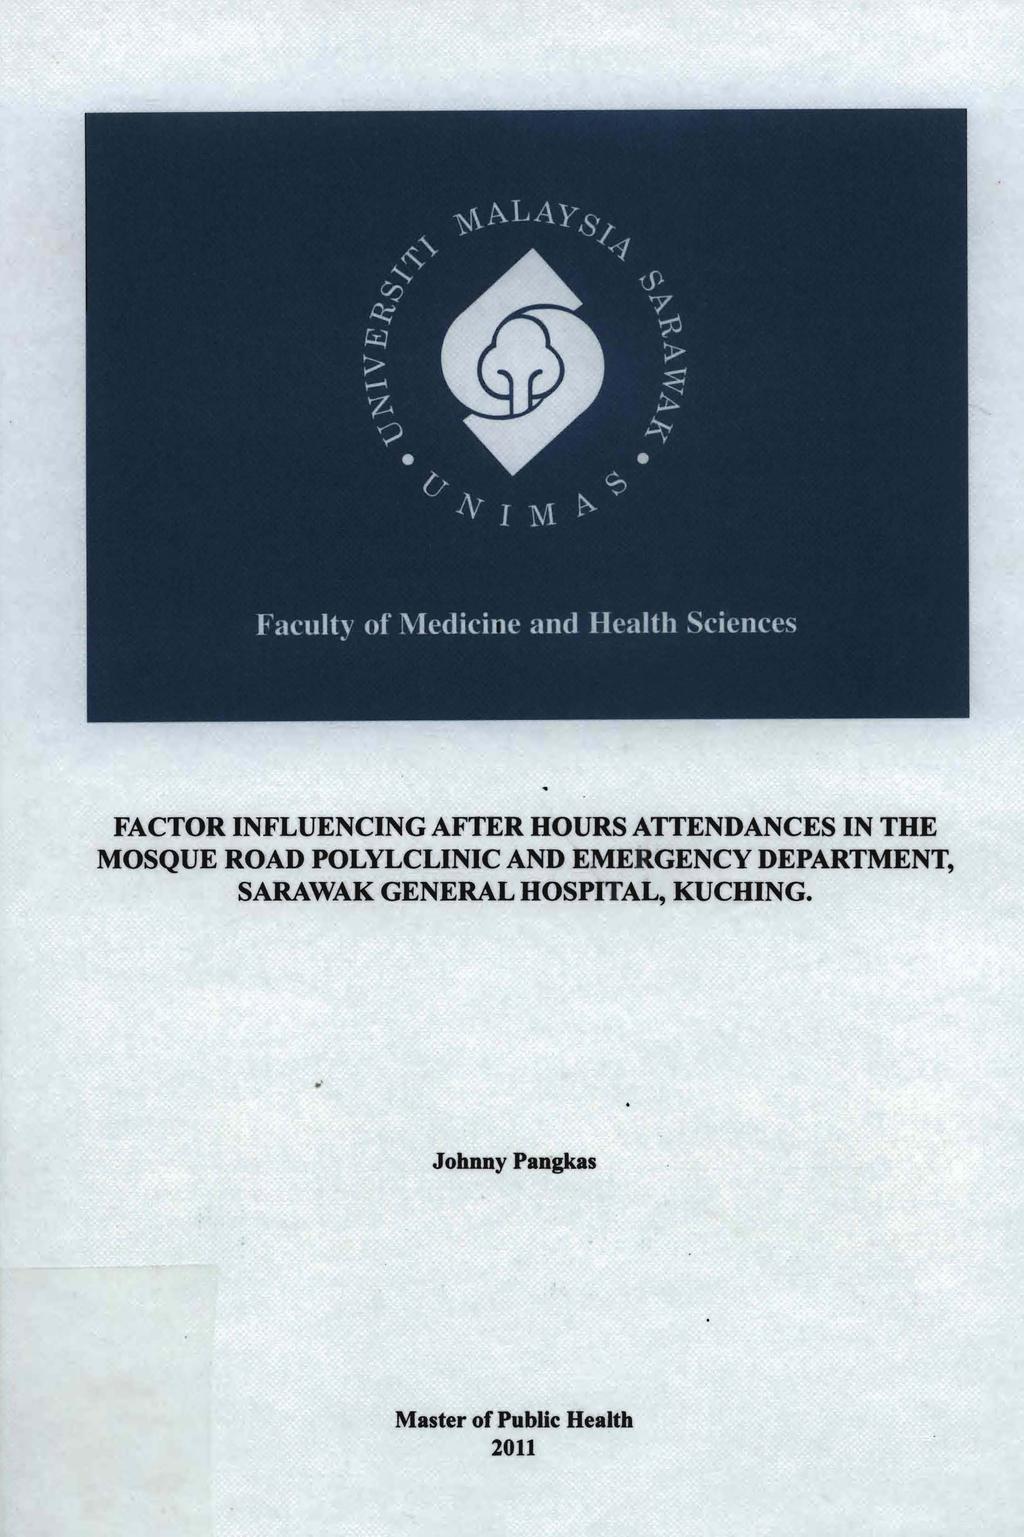 FACTOR INFLUENCING AFTER HOURS ATTENDANCES IN THE MOSQUE ROAD POLYLCLINIC AND EMERGENCY